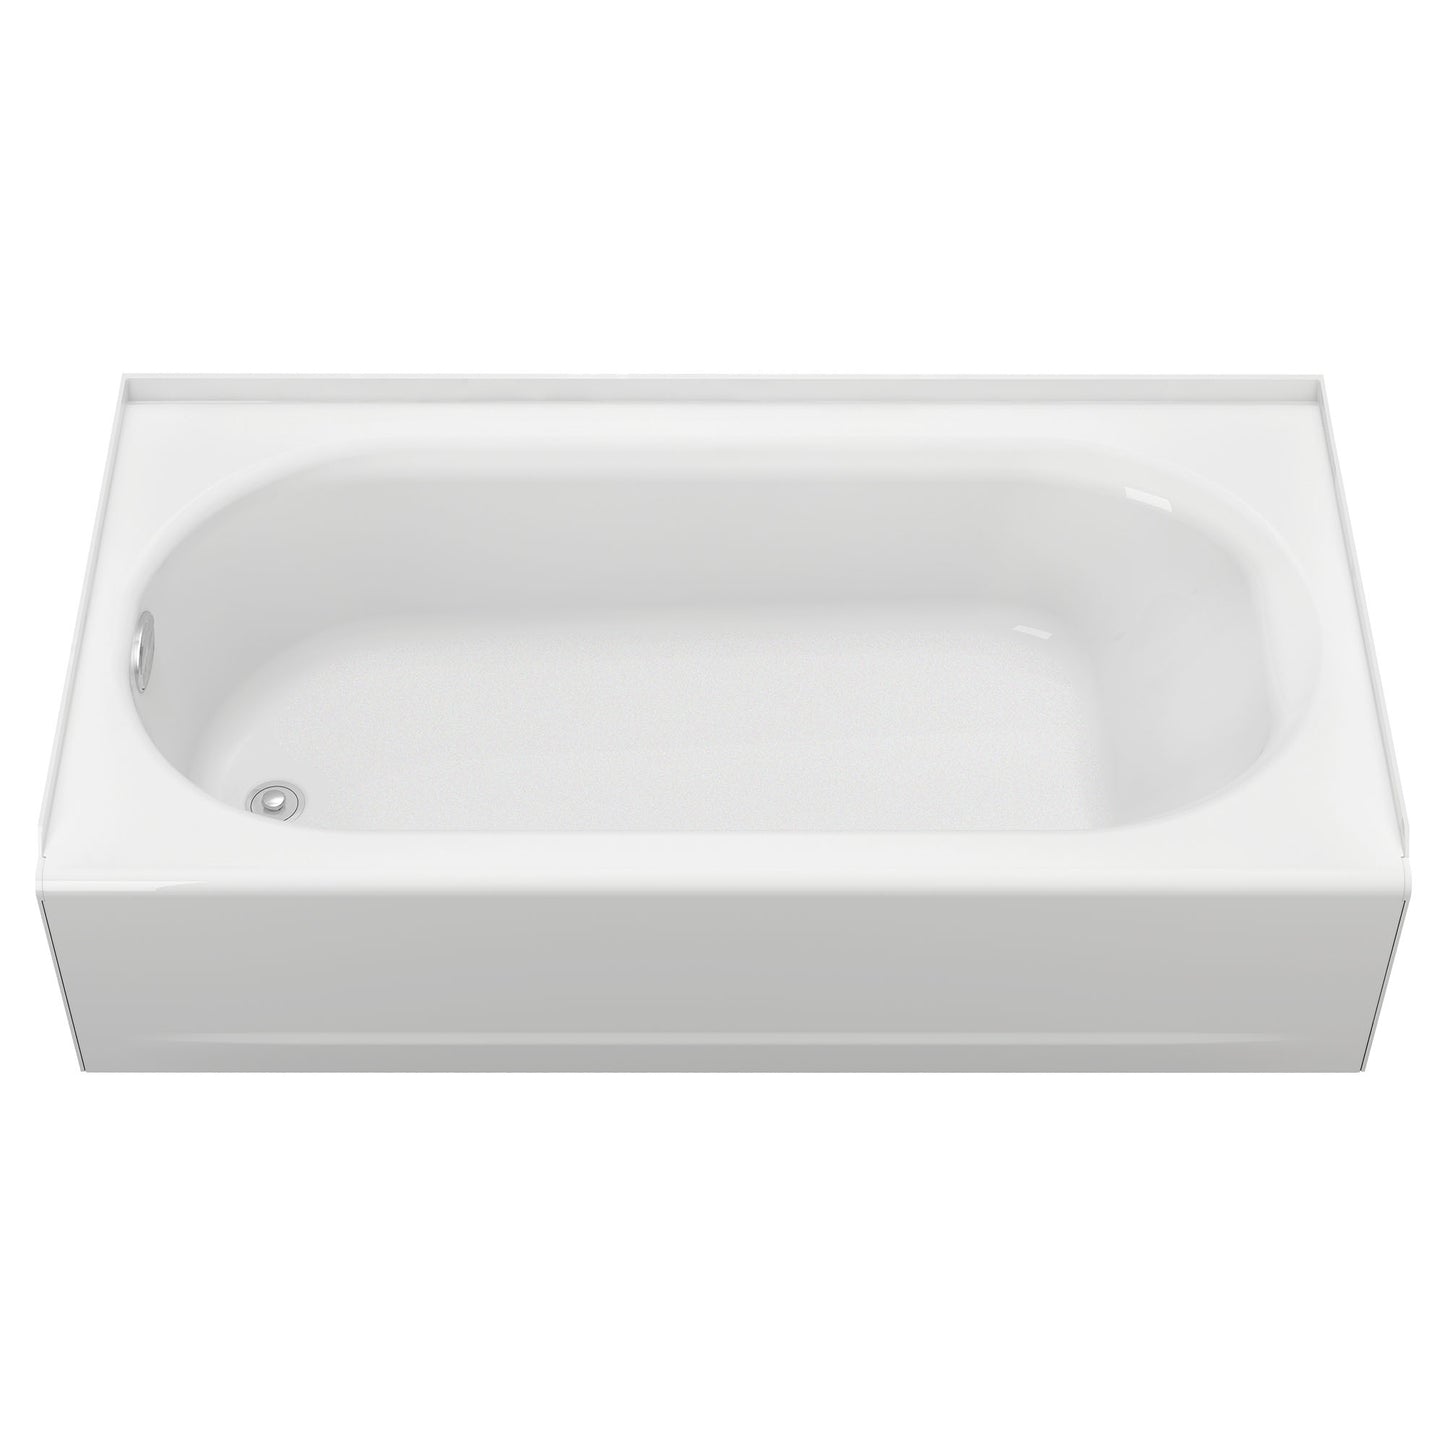 AMERICAN-STANDARD 2394202ICH.020, Princeton Americast 60 x 34-Inch Integral Apron Bathtub Left-Hand Outlet Luxury Ledge with Integral Drain in White